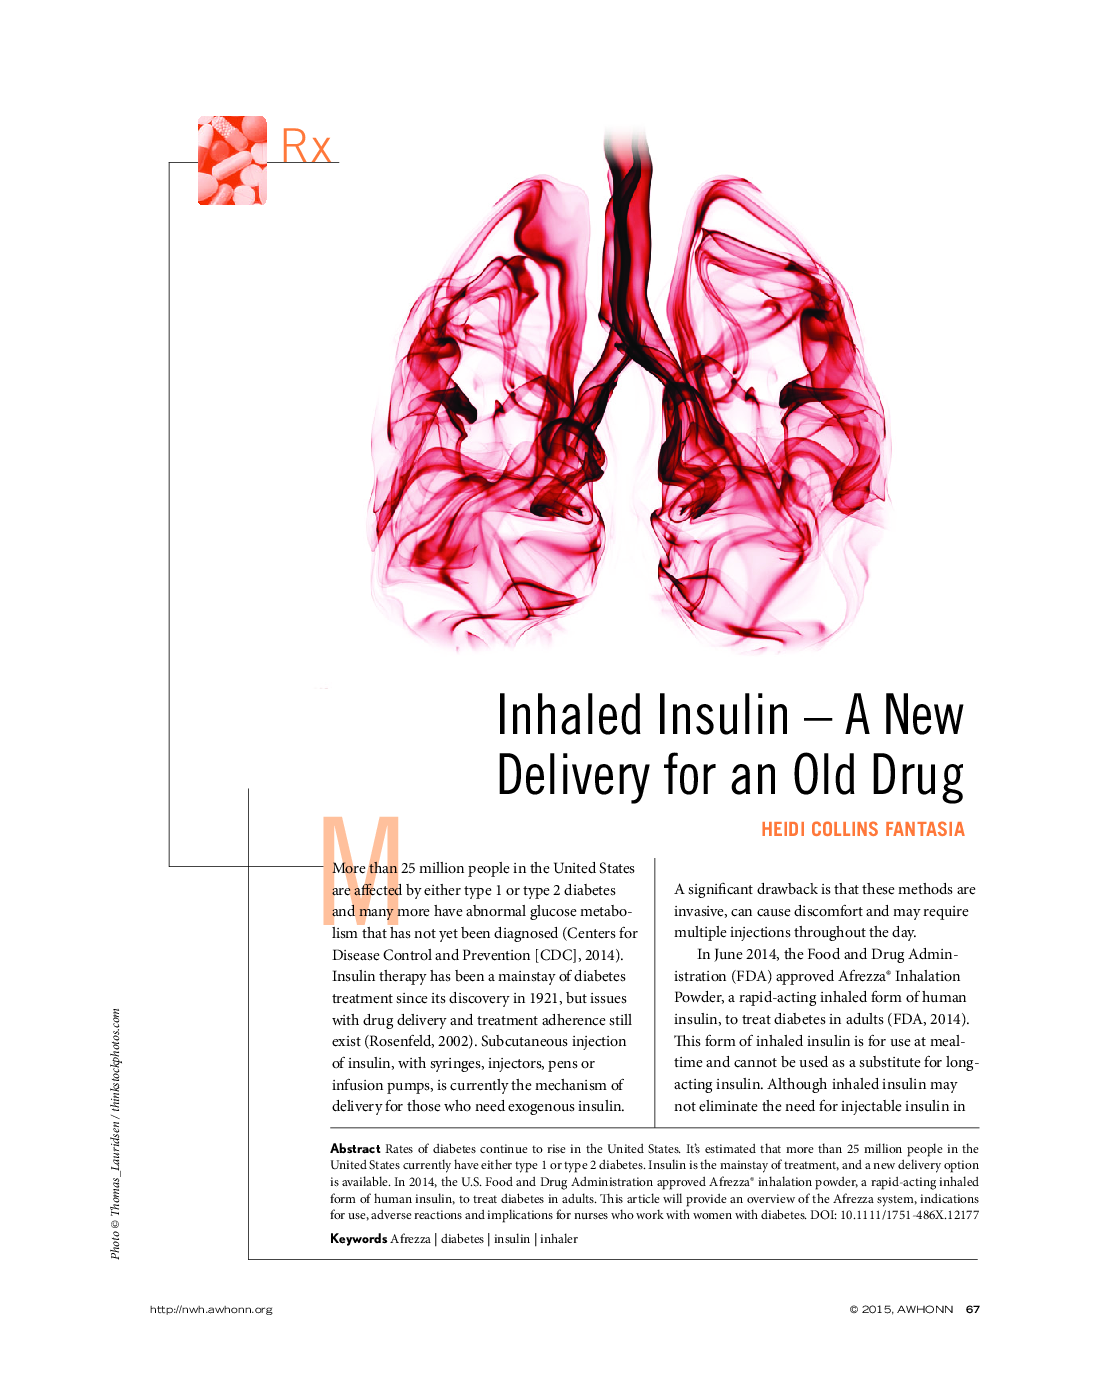 Inhaled Insulin - A New Delivery for an Old Drug